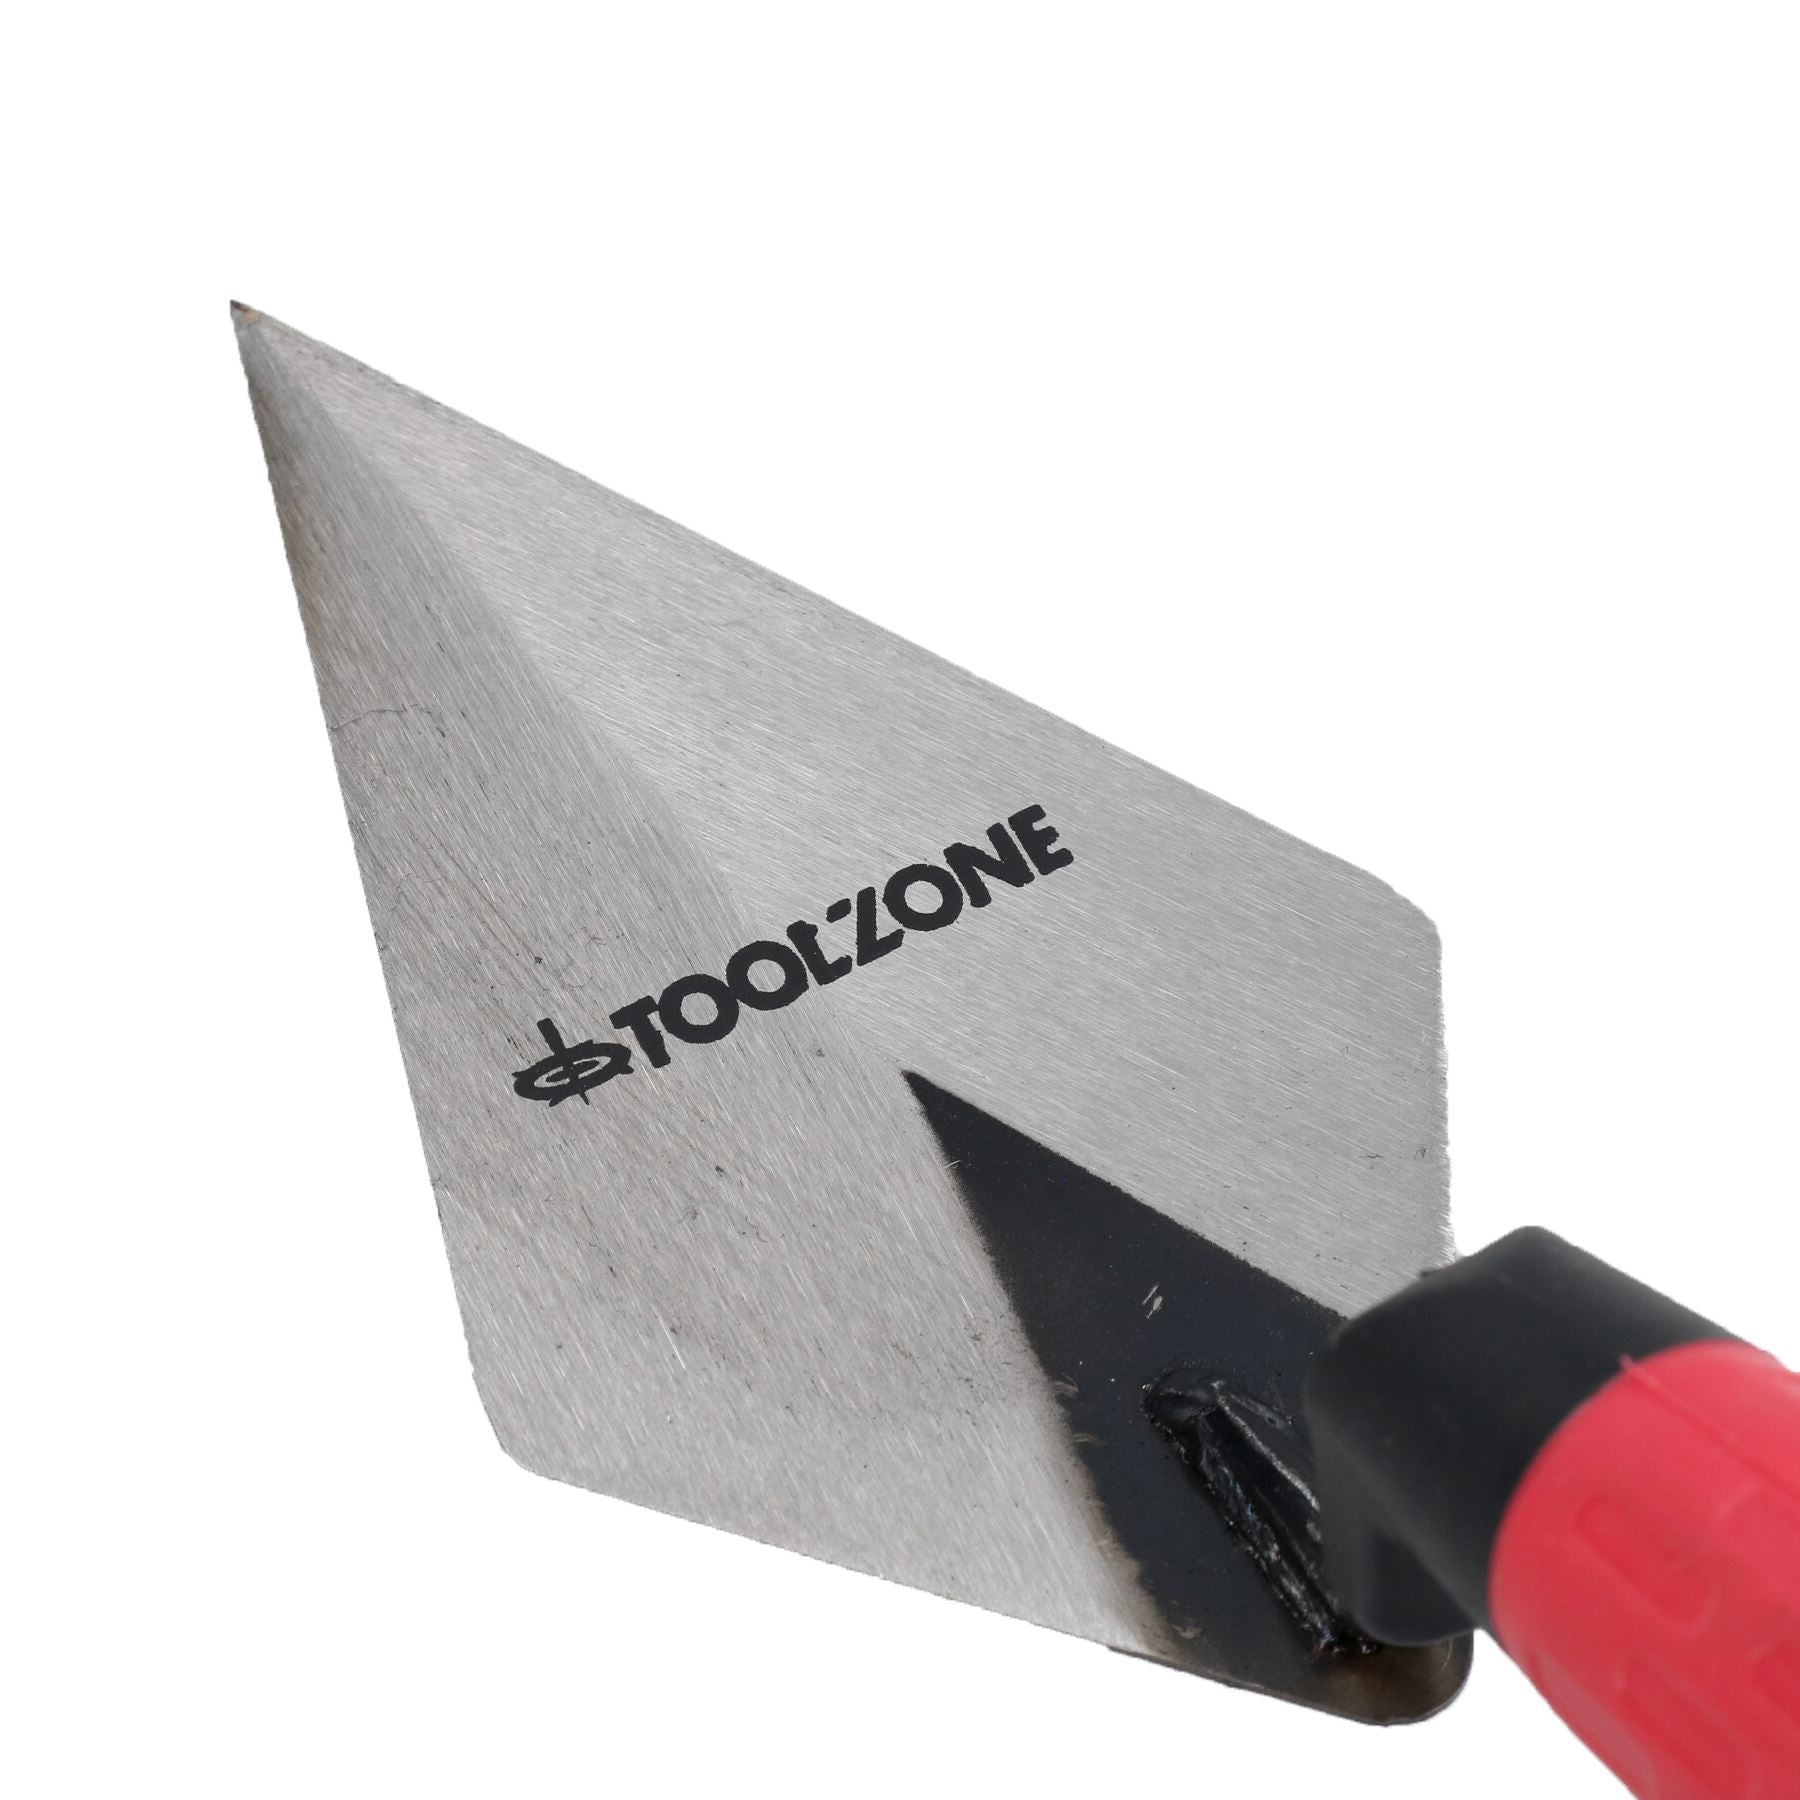 6” Pointing Trowel for Brick Block laying Cement Plastering Soft Grip handle